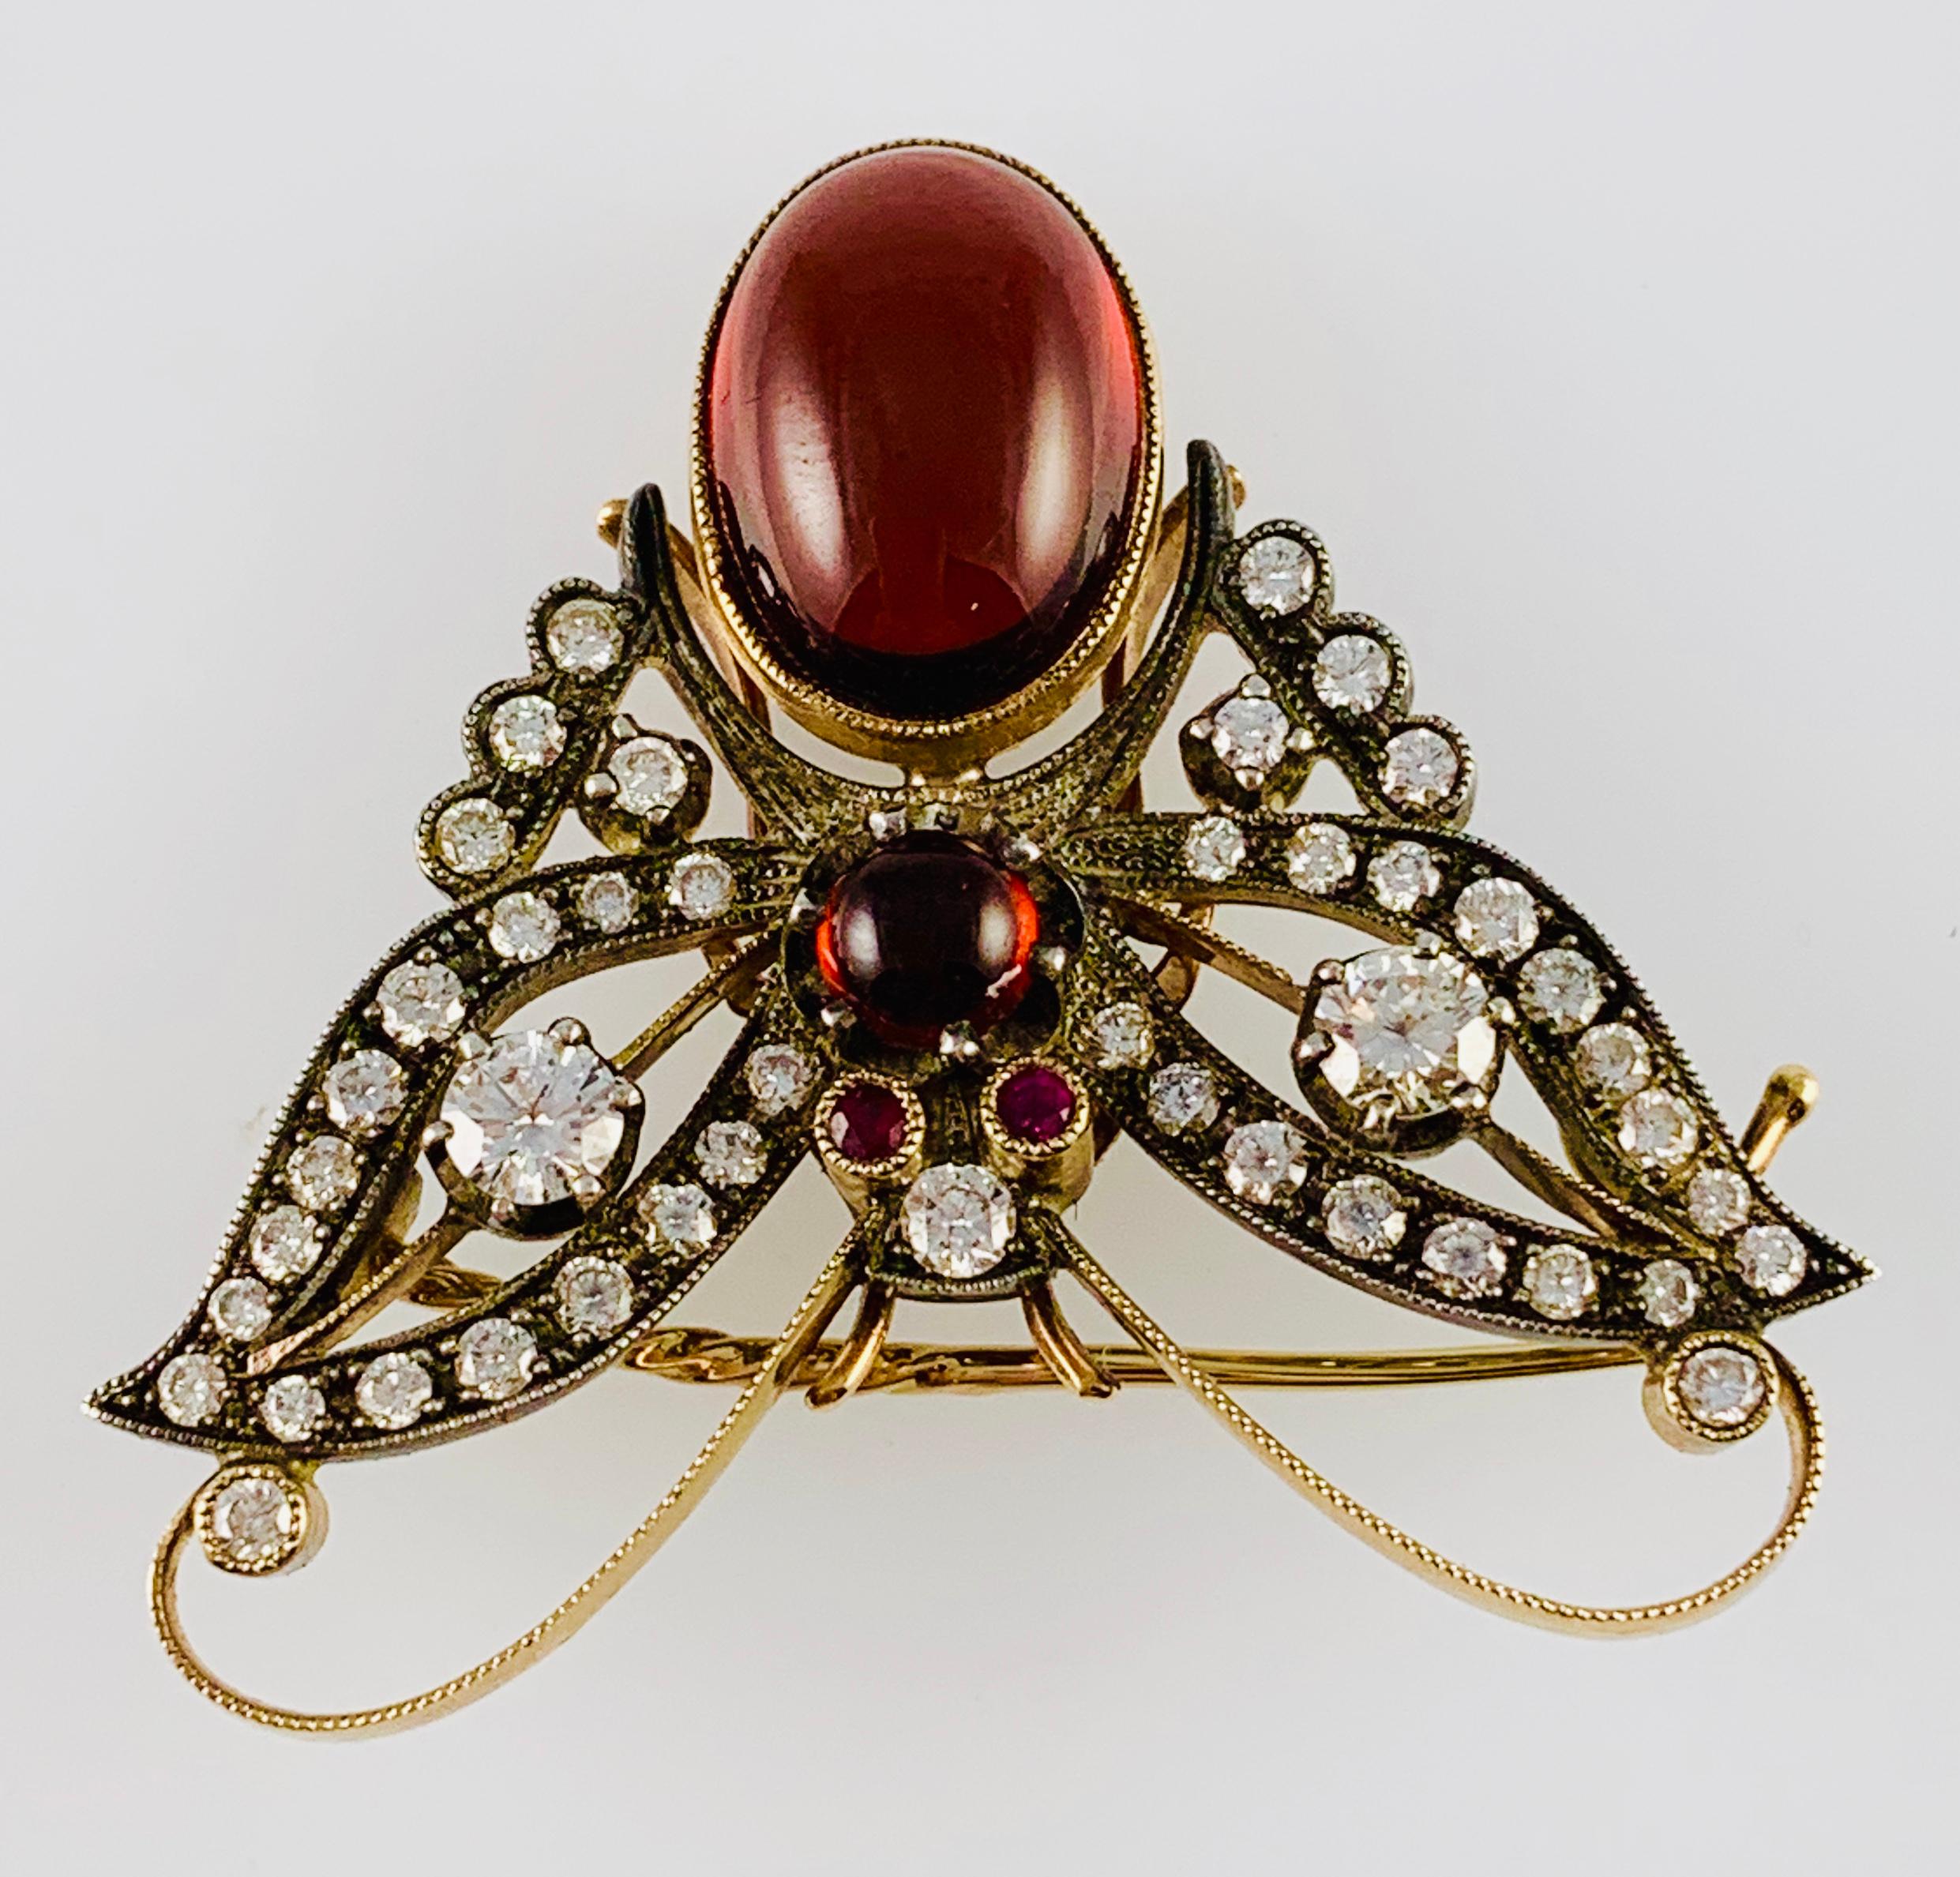 Beautiful Estate Butterfly Brooch! Made in 18k yellow Gold the butterfly has Ruby Eyes, Diamond Wings and two cabochon cut garnets that make up the body. There are 45 Brilliant Diamonds that are G-H Color & Vs2 clarity. The diamonds have an